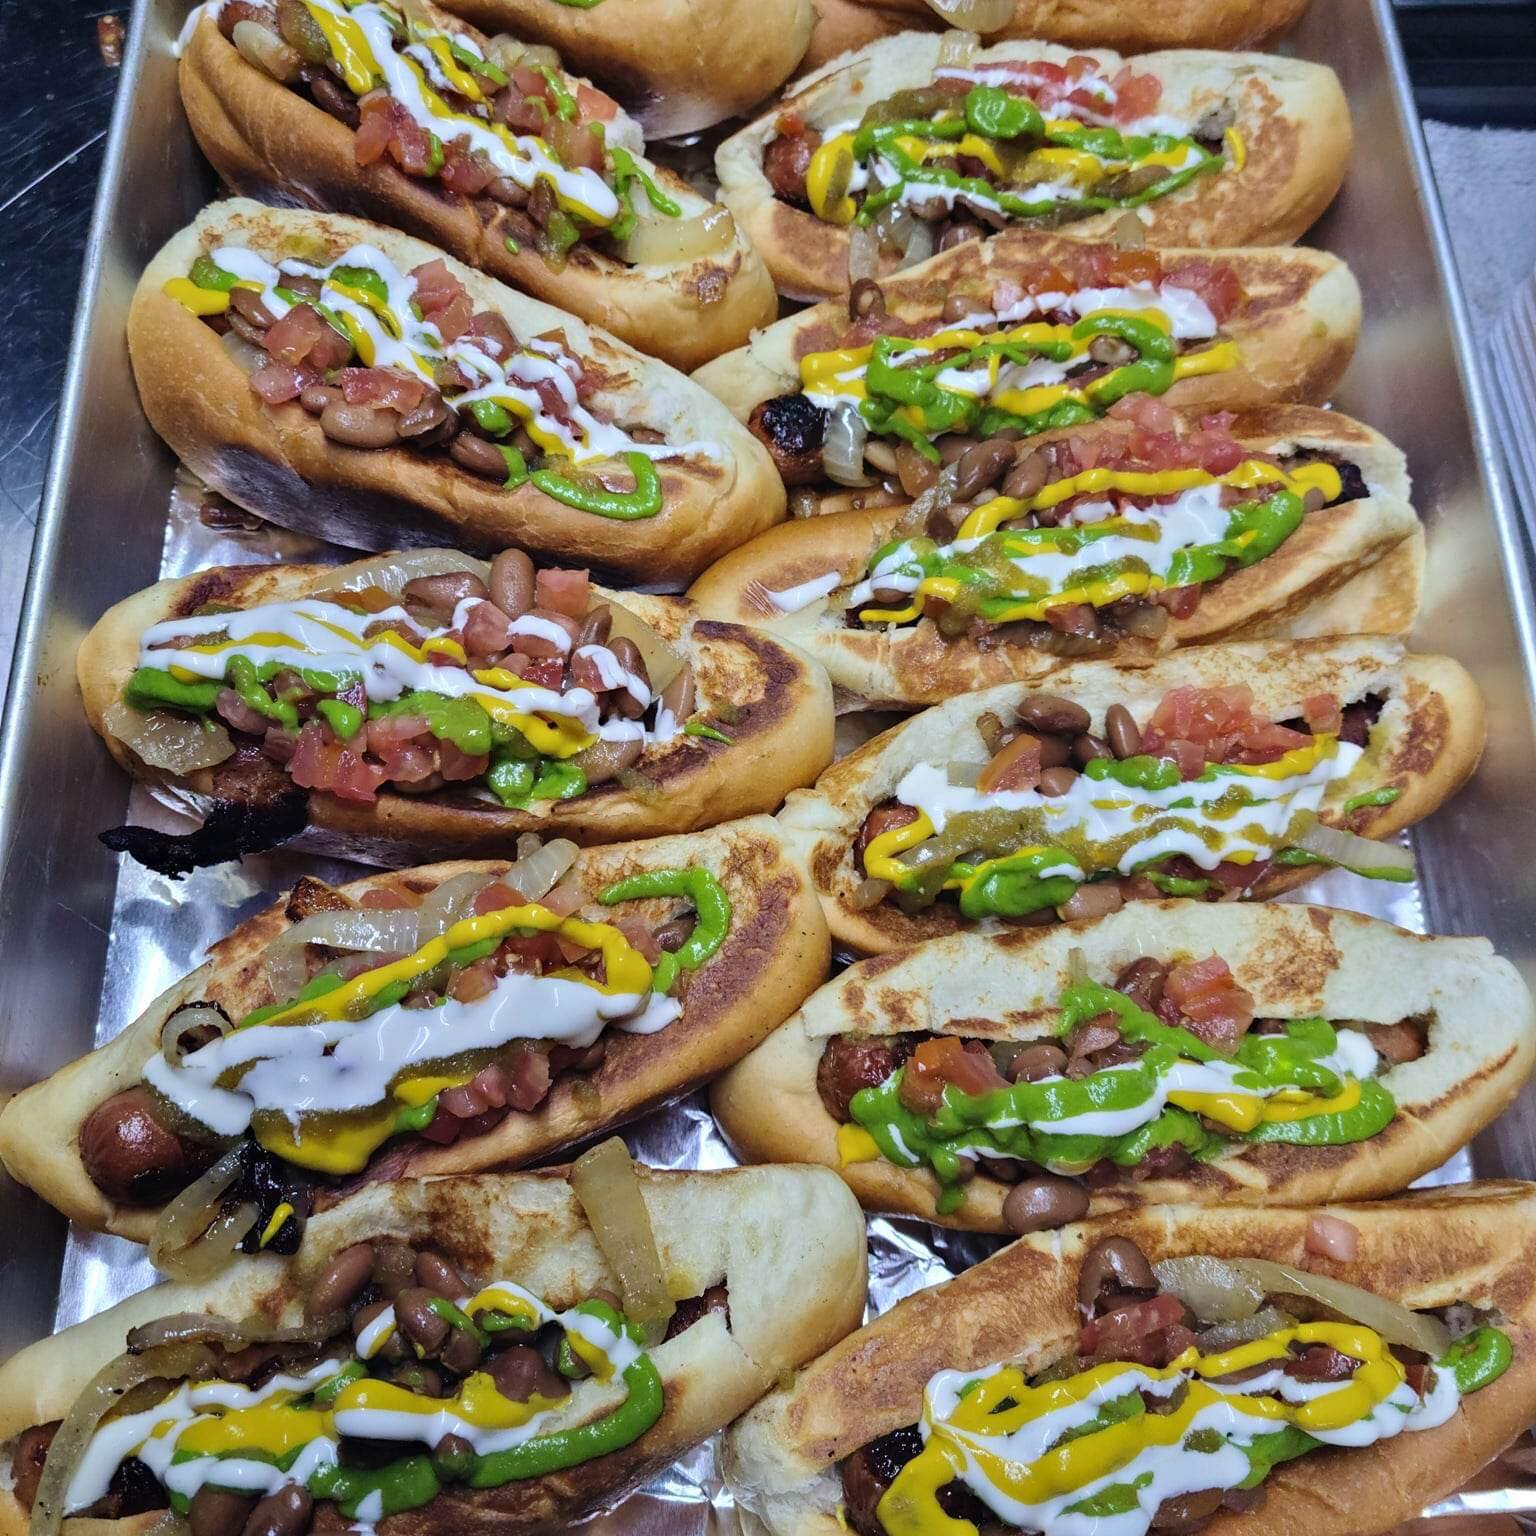 Chino's Sonoran Hot Dogs